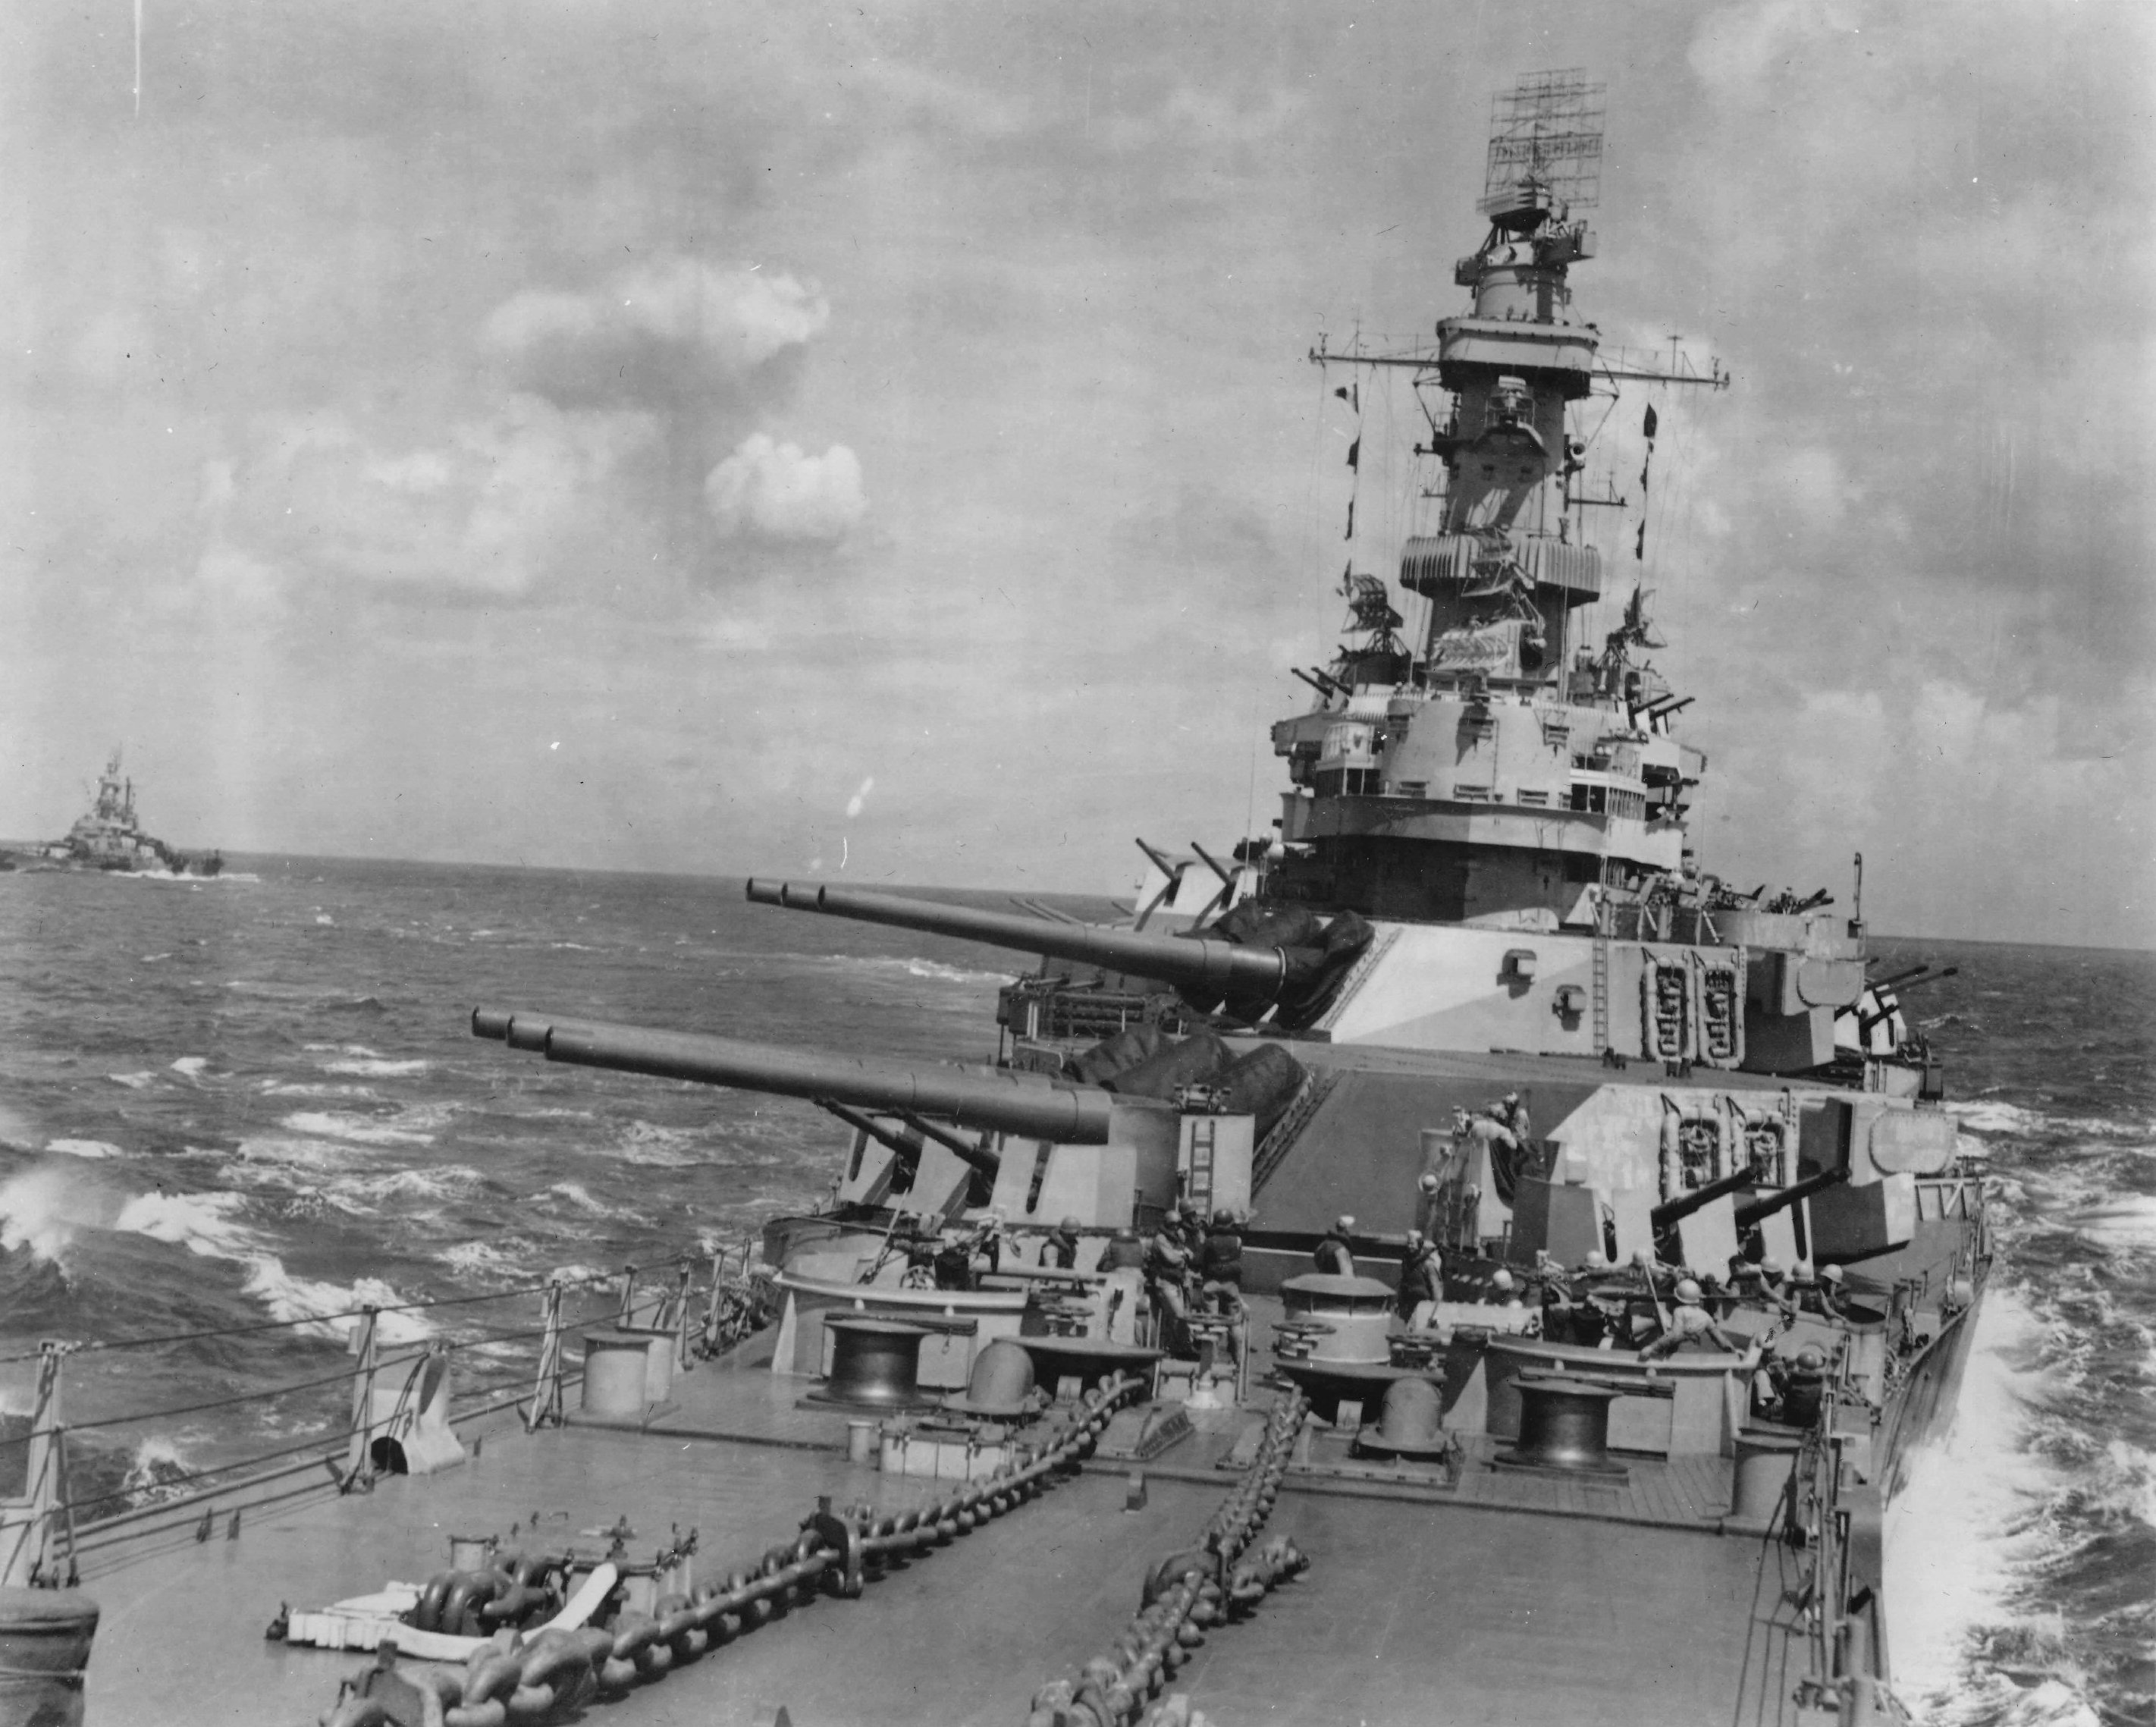 Forward guns and superstructure of USS Iowa underway during the Marshall Islands Campaign alongside USS Indiana, 24 Jan 1944.